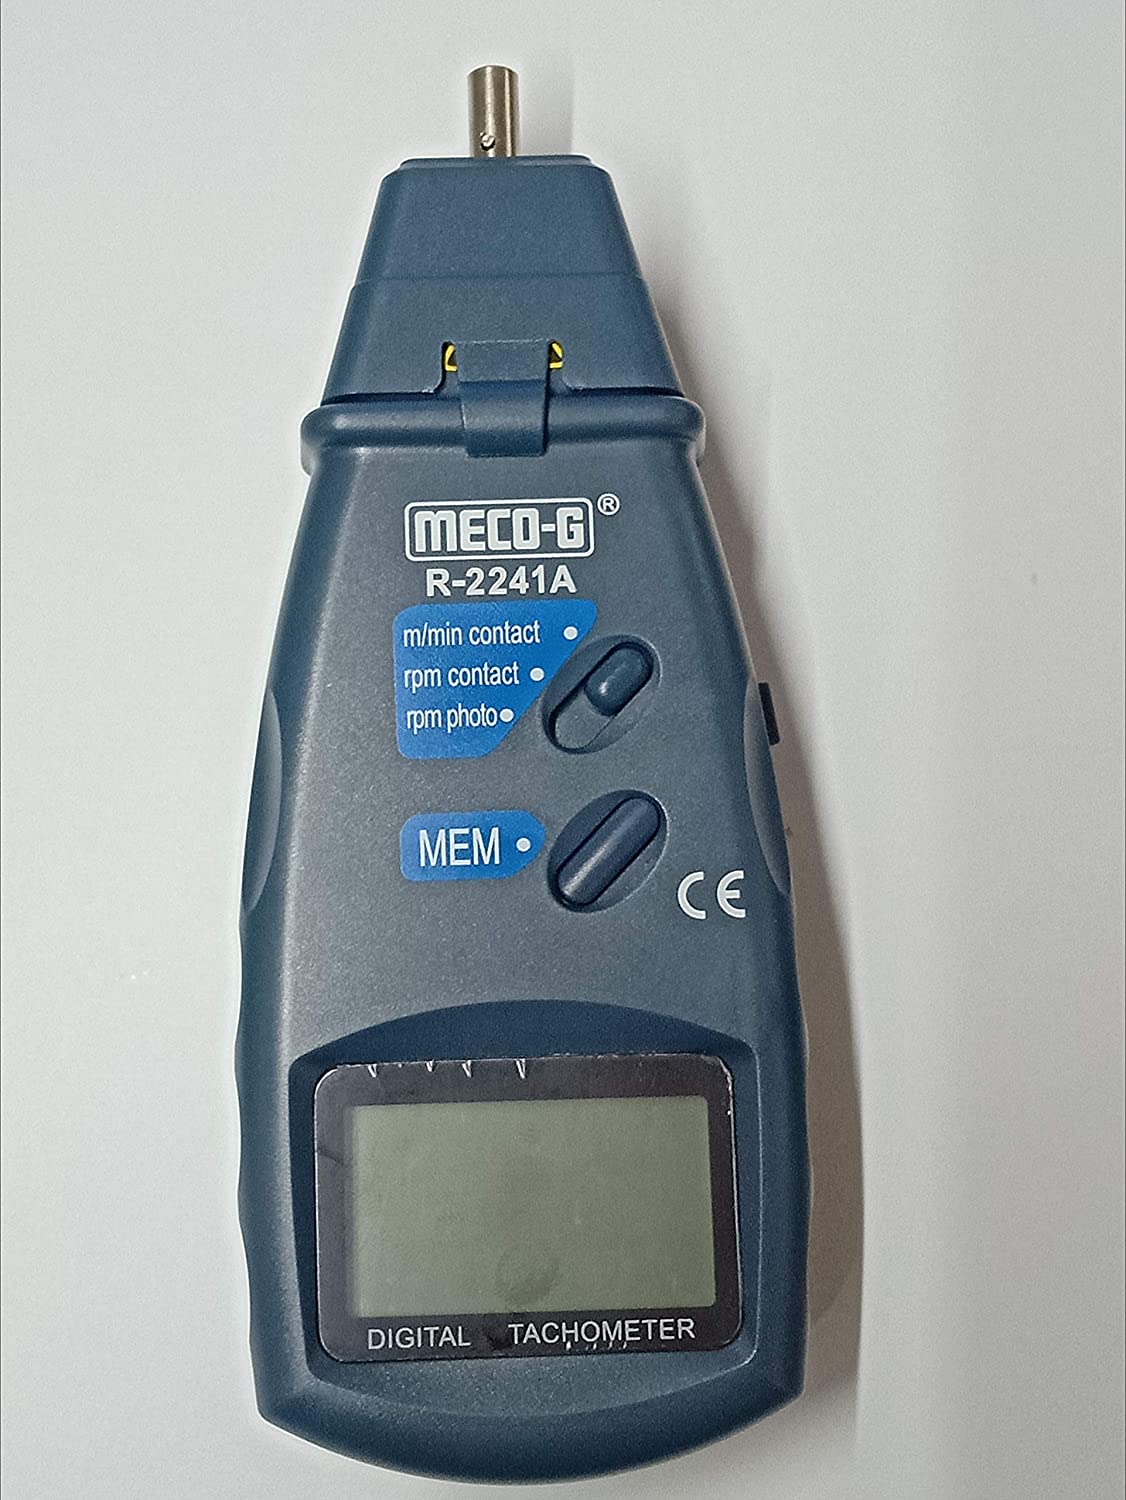 MECO-G,R-2241A Non-Contact Laser Beam Digital and Contact Tachometer